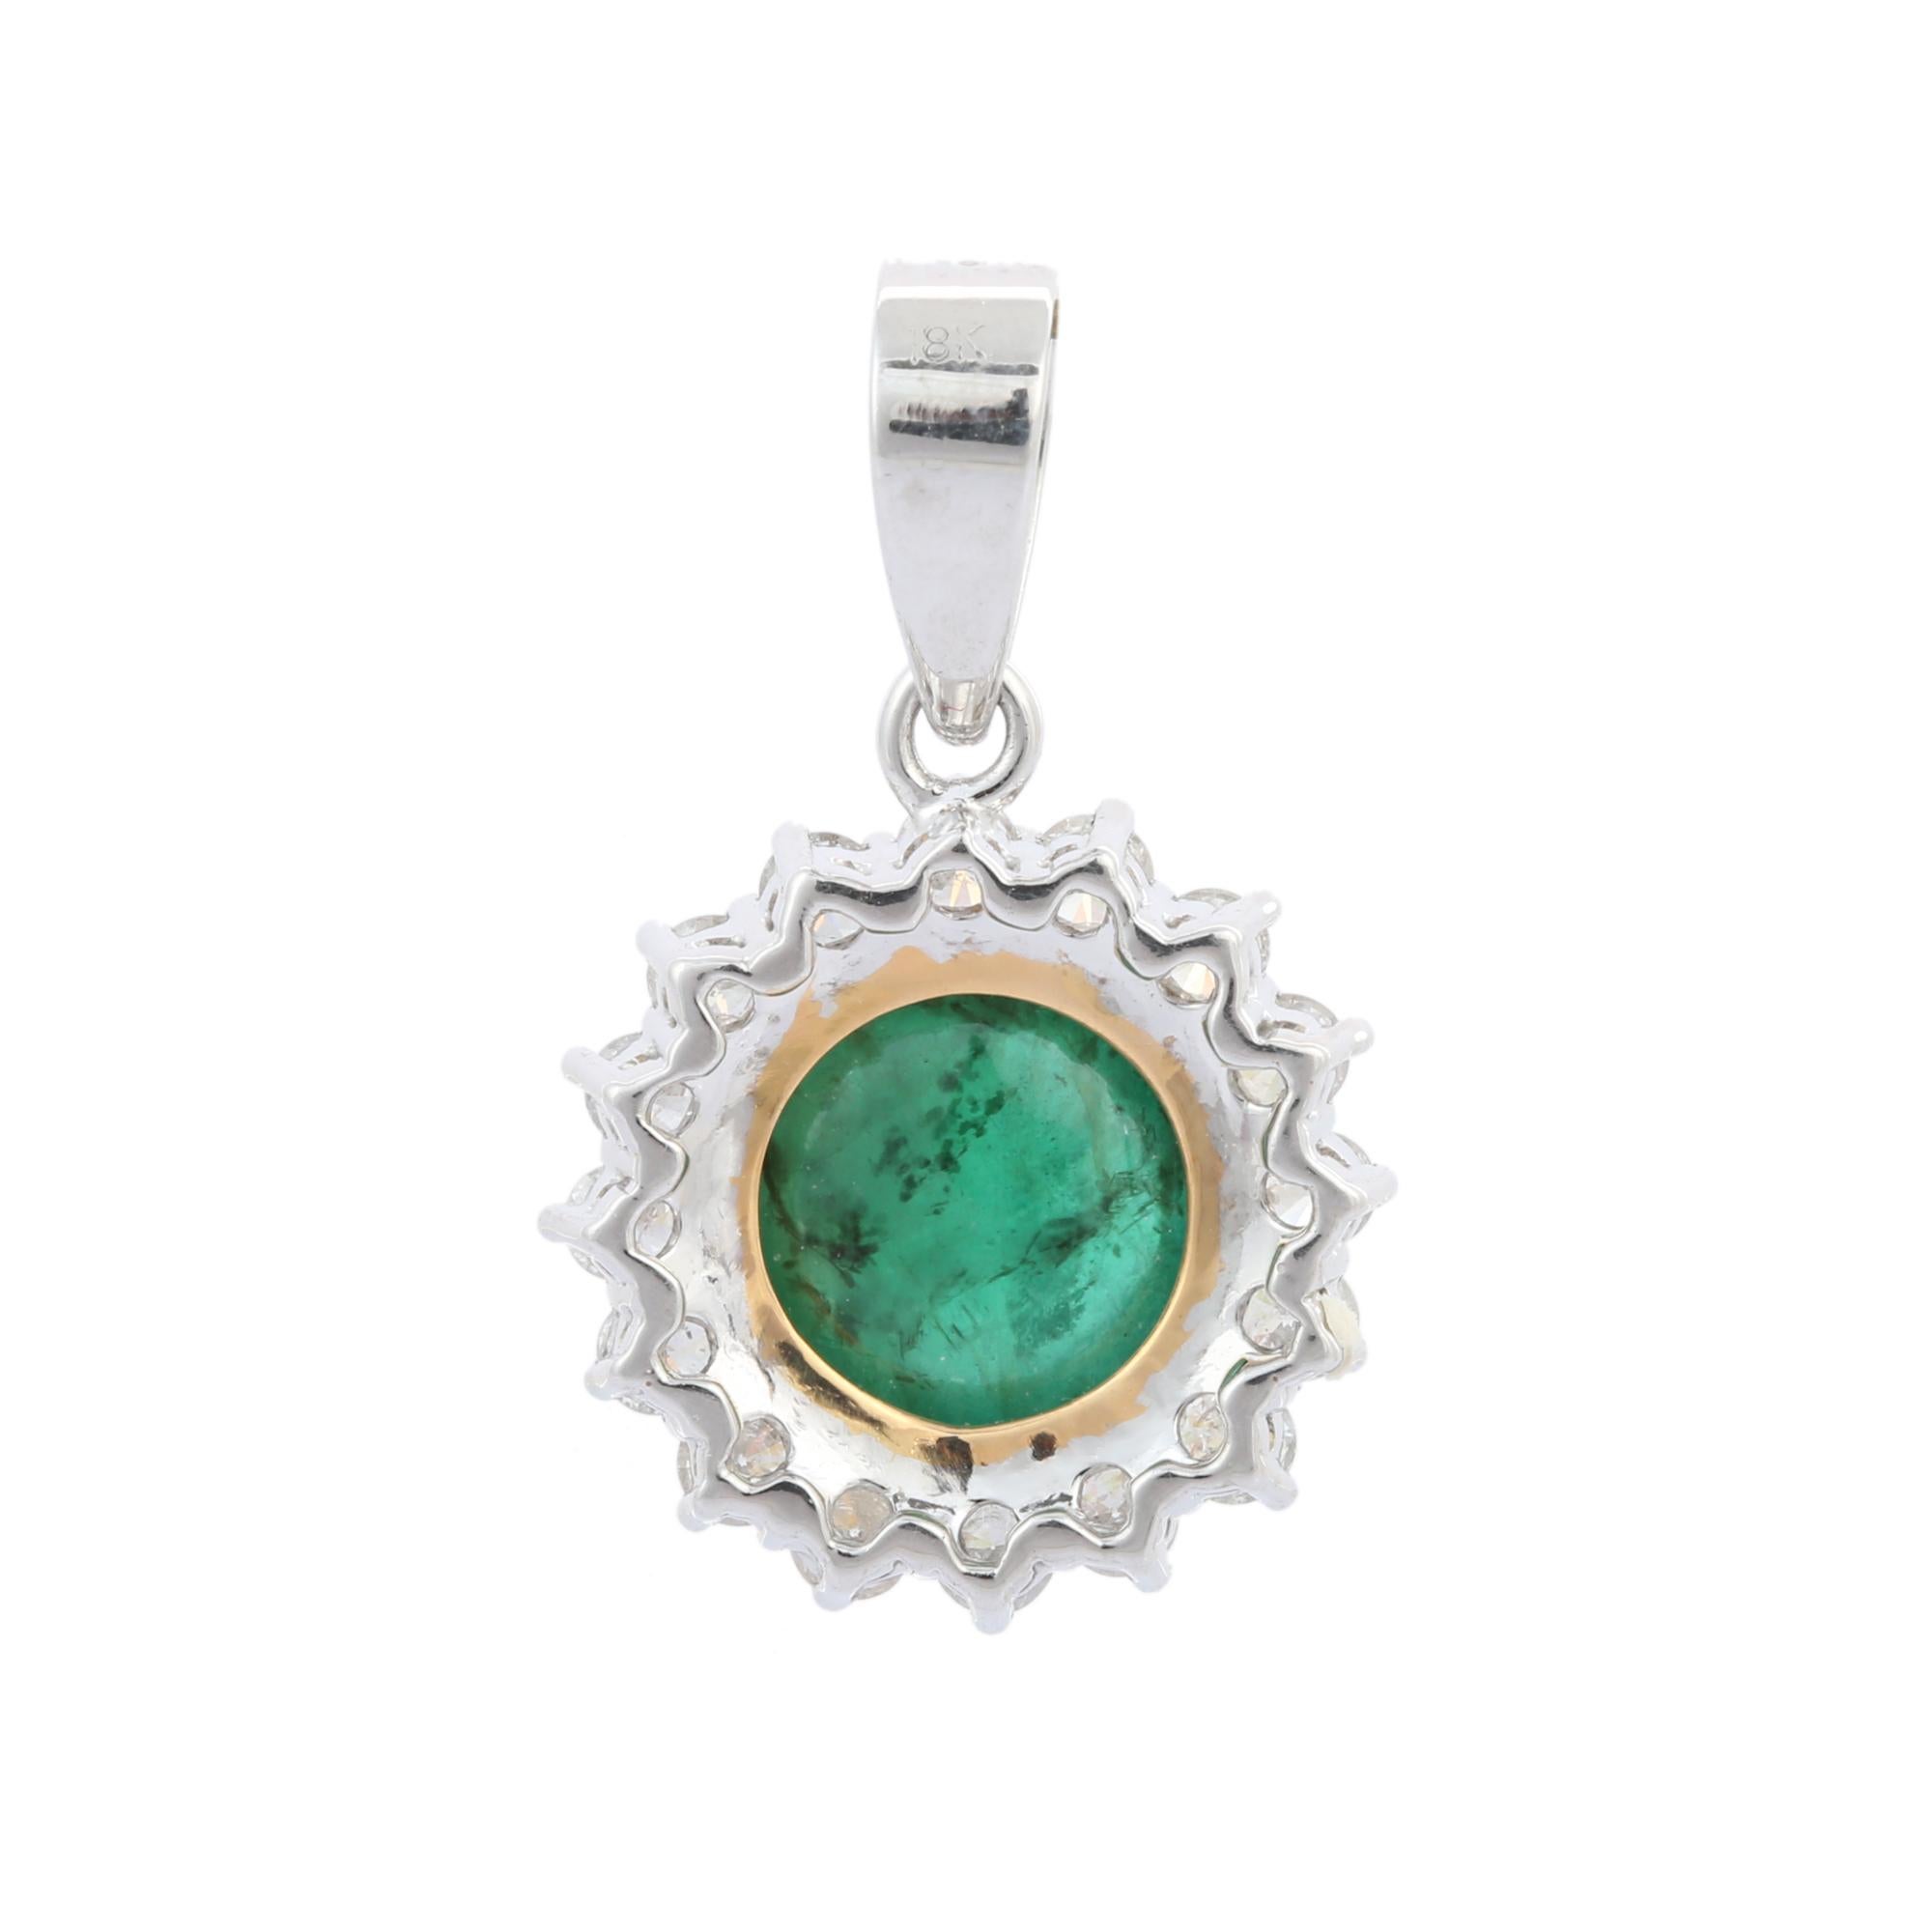 Contemporary Style 3.45 Carat Round Emerald Diamond Pendant in 18K White Gold  In New Condition For Sale In Houston, TX